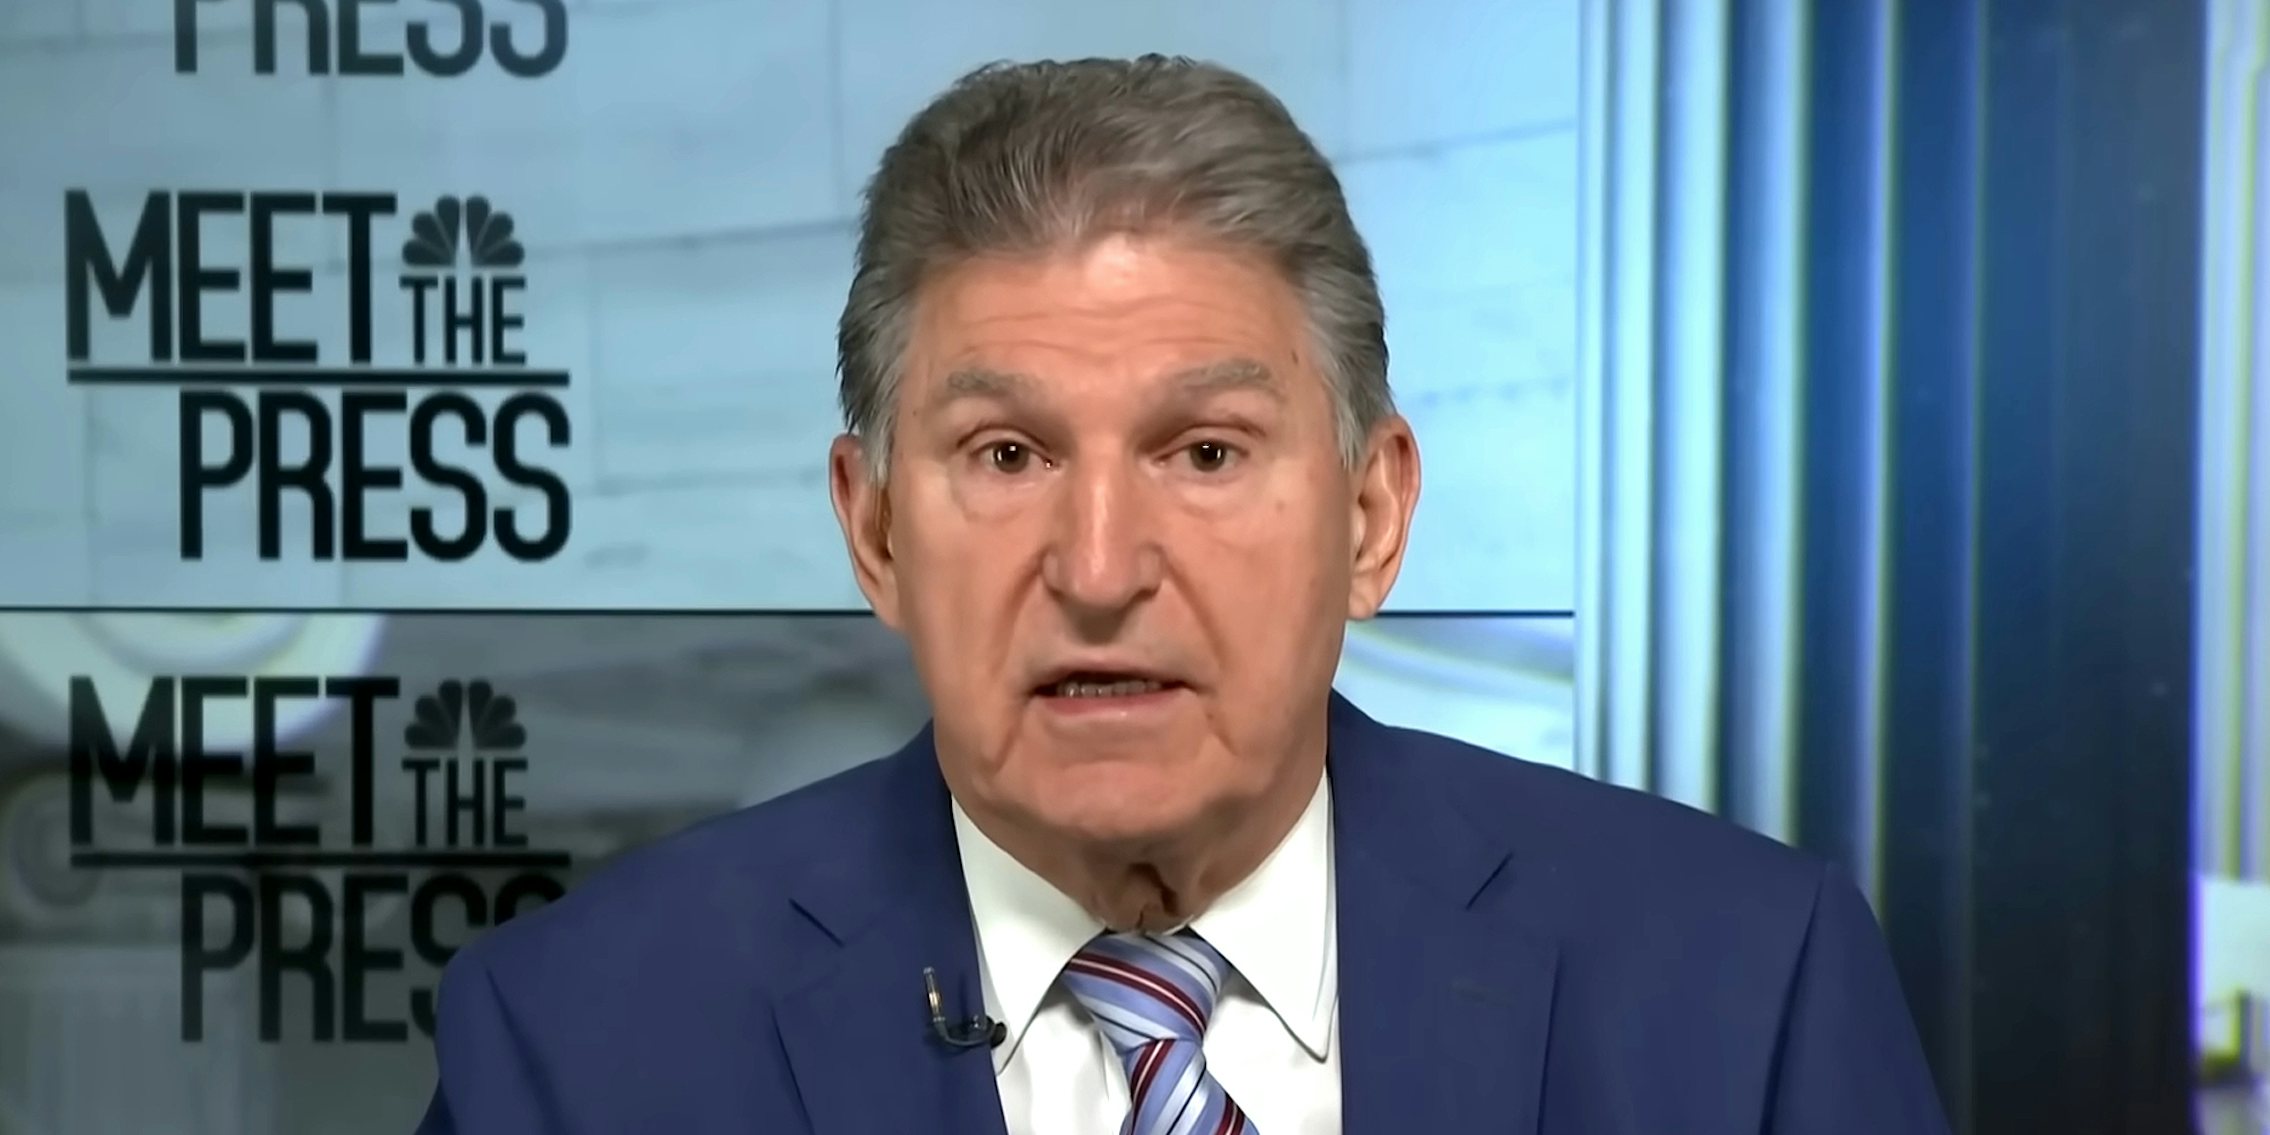 Joe Manchin speaking in front of blue background during Meet the Press on NBC News